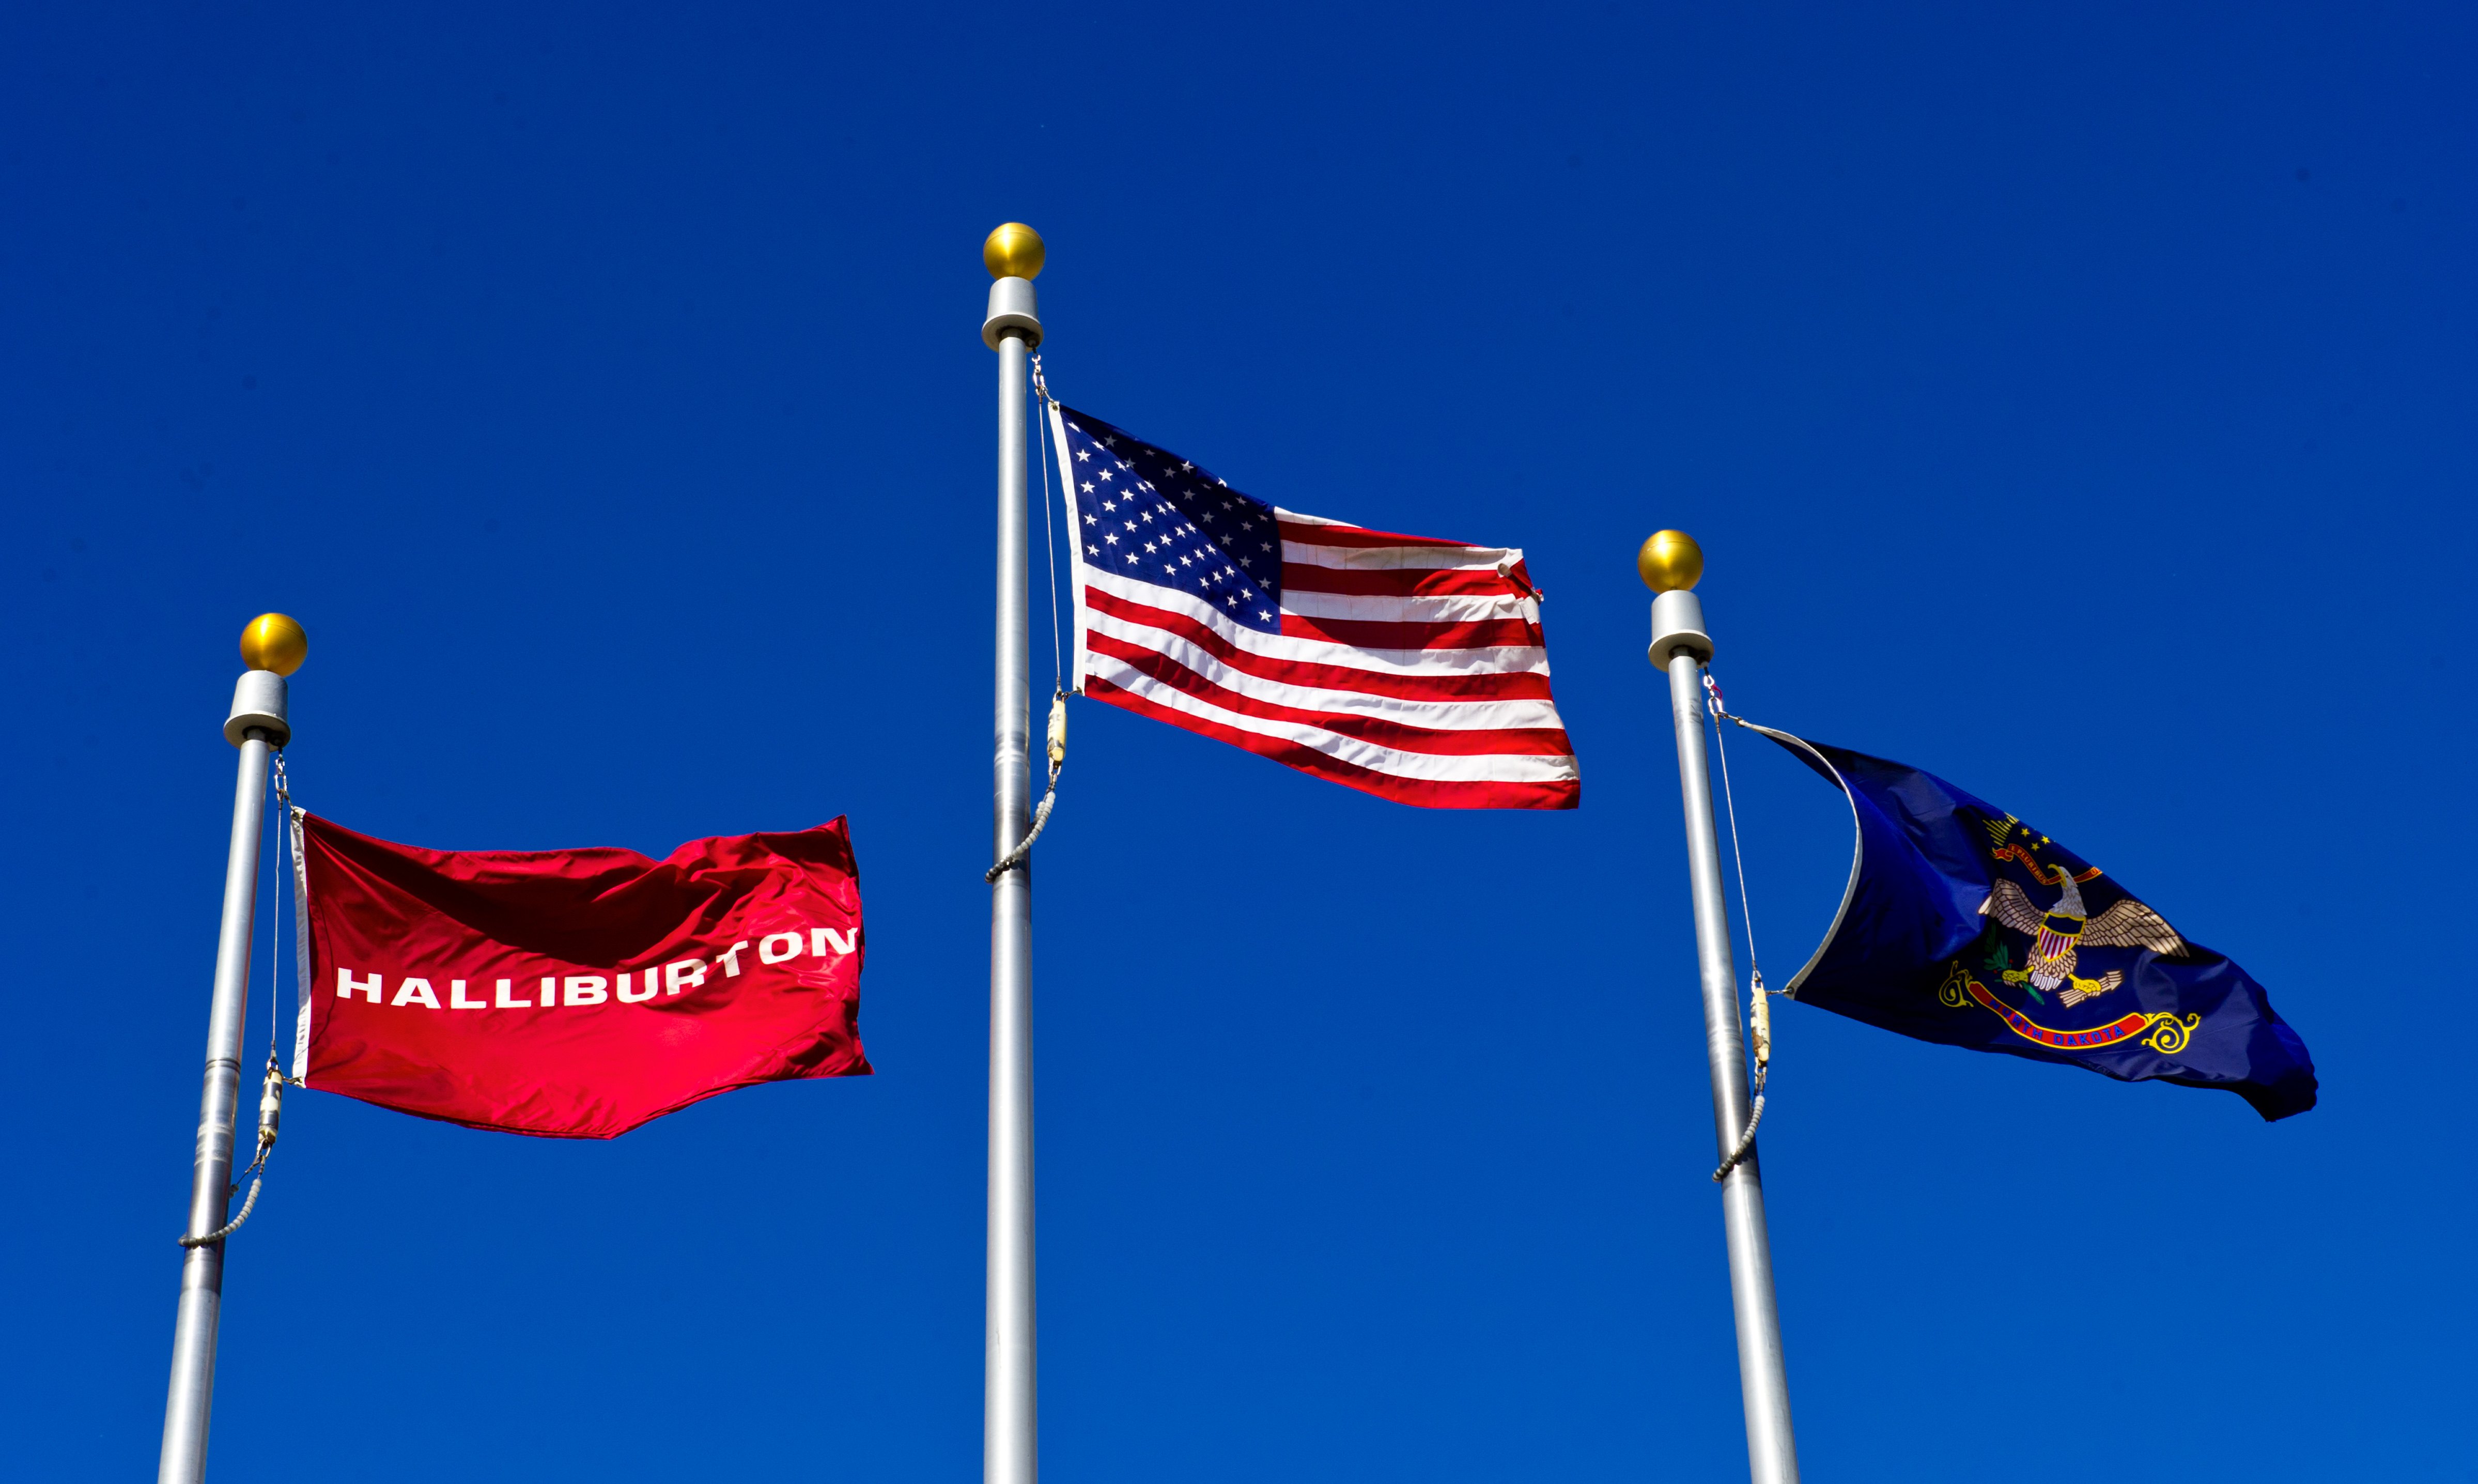 Flags flying at a Halliburton facility in Williston, North Dakota on Aug. 20, 2013. (Karen Blieber—AFP/Getty Images)